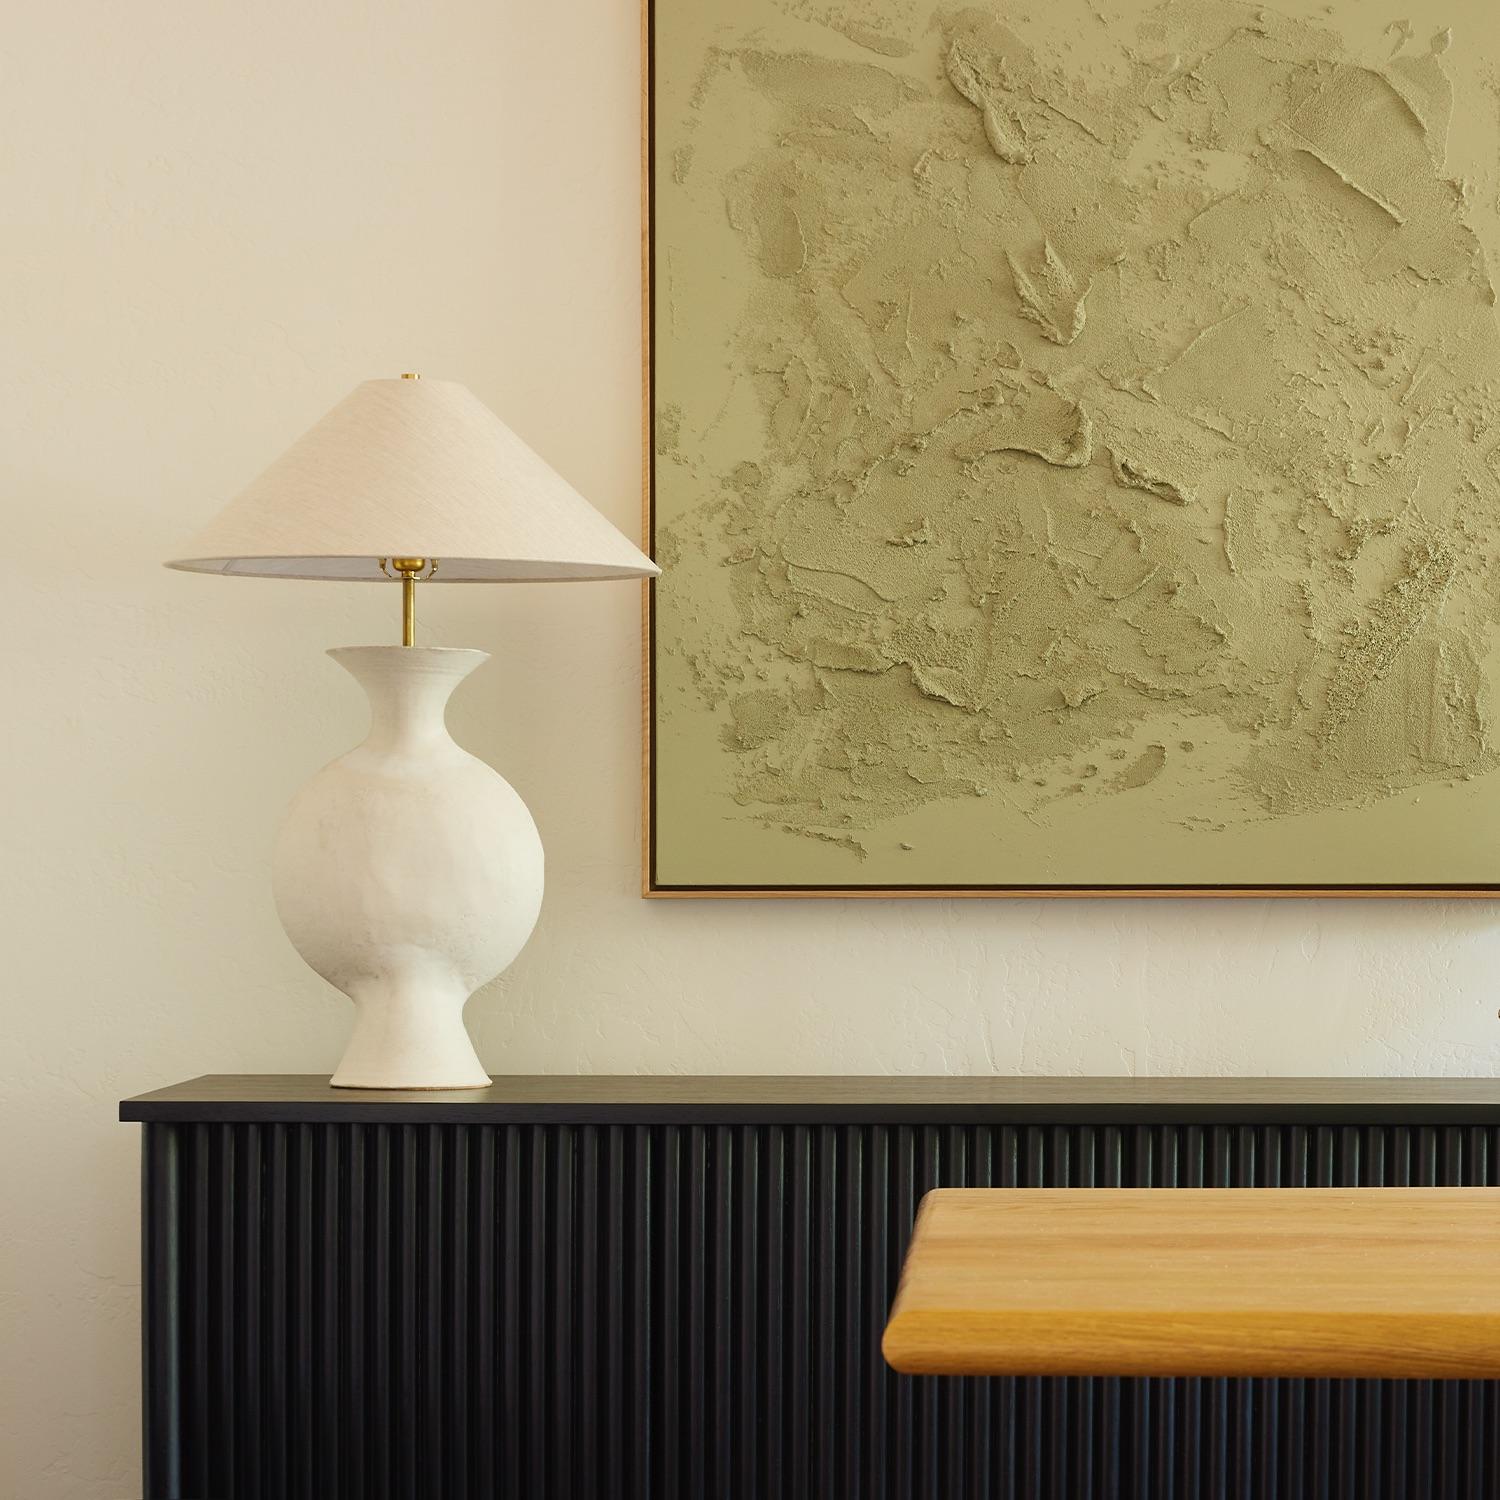 The Antonia lamp is handmade studio pottery by ceramic artist by Danny Kaplan. Shade included. Please note dimensions may vary up to an inch.

Born in New York City and raised in Aix-en-Provence, France, Danny Kaplan’s passion for ceramics was